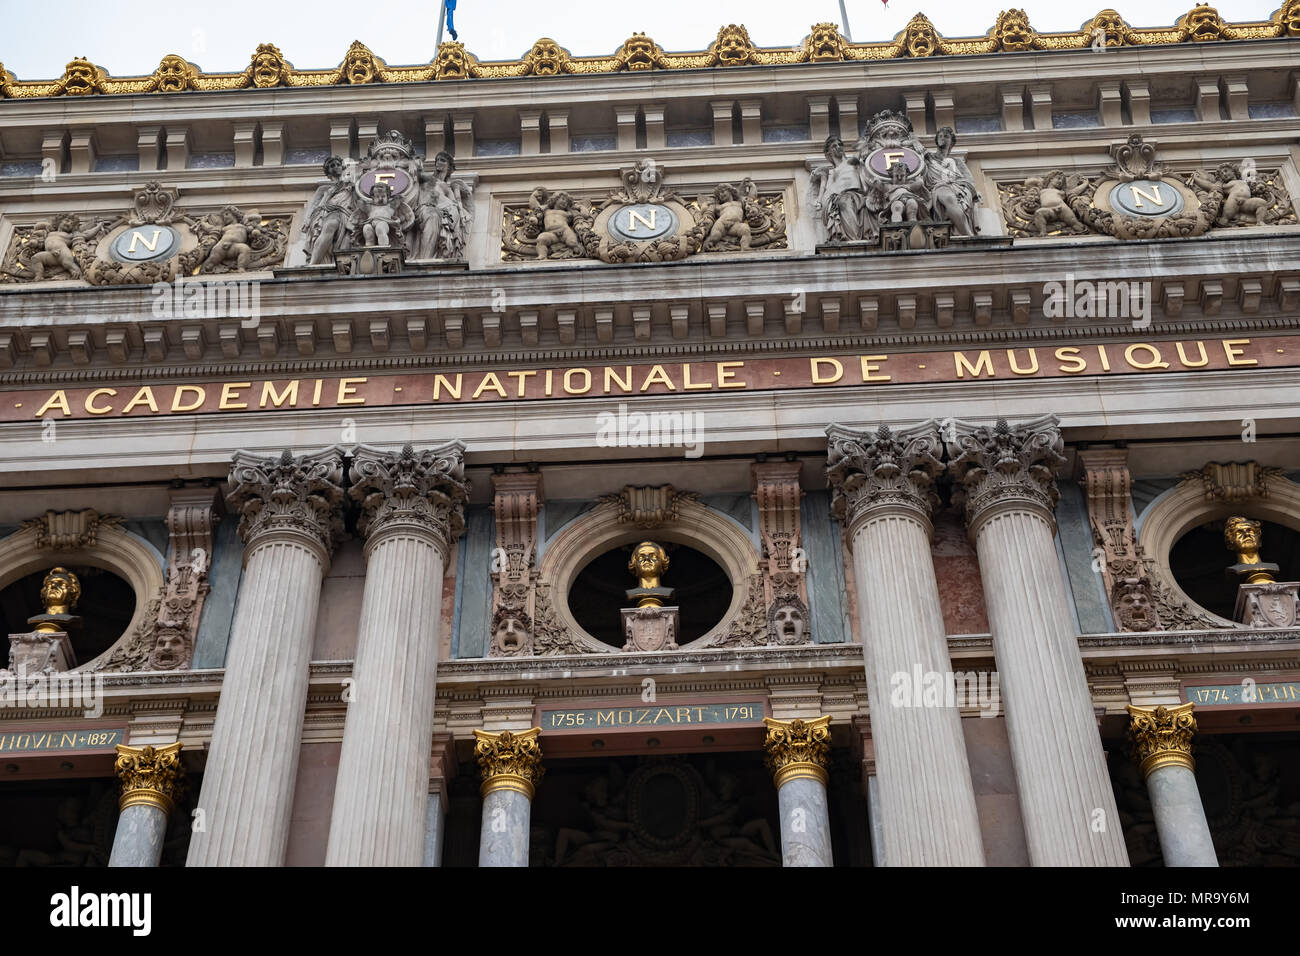 The National Academy of Music, Academie Nationale De Musique, is located within the Paris Opera House. Stock Photo